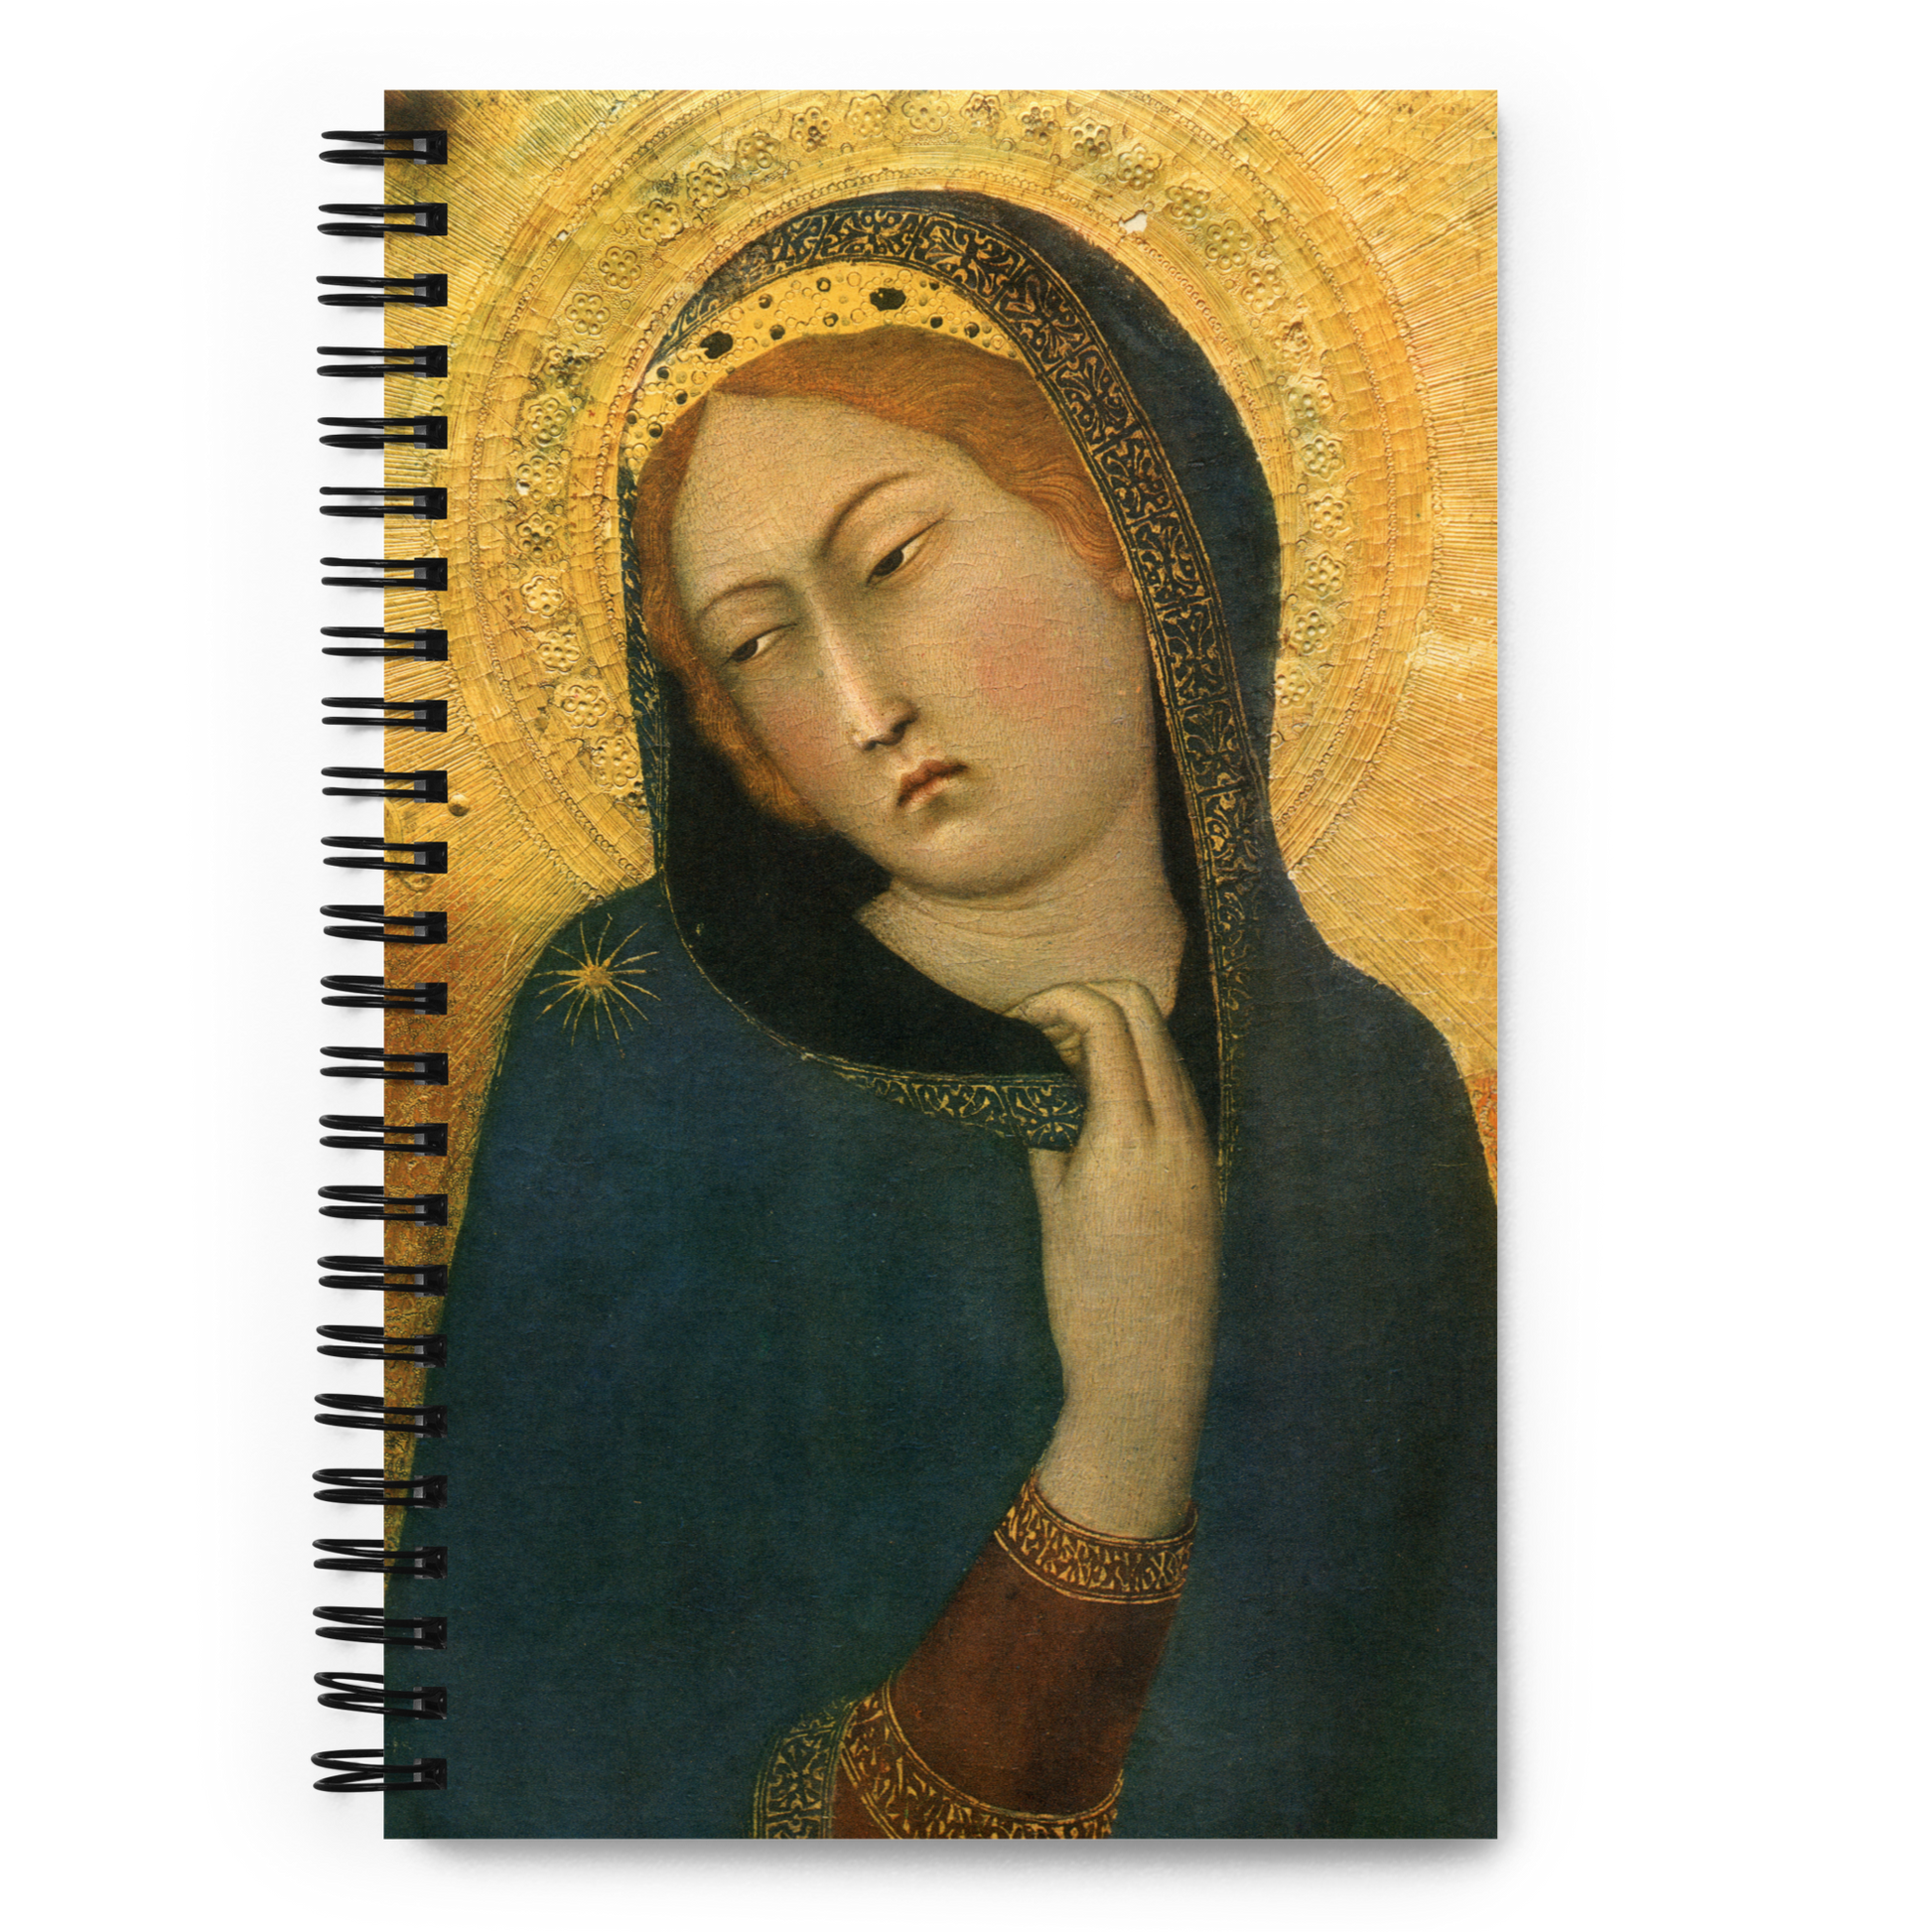 Annunciation of the Virgin Mary Spiral Notebook - Sanctus Art Gallery